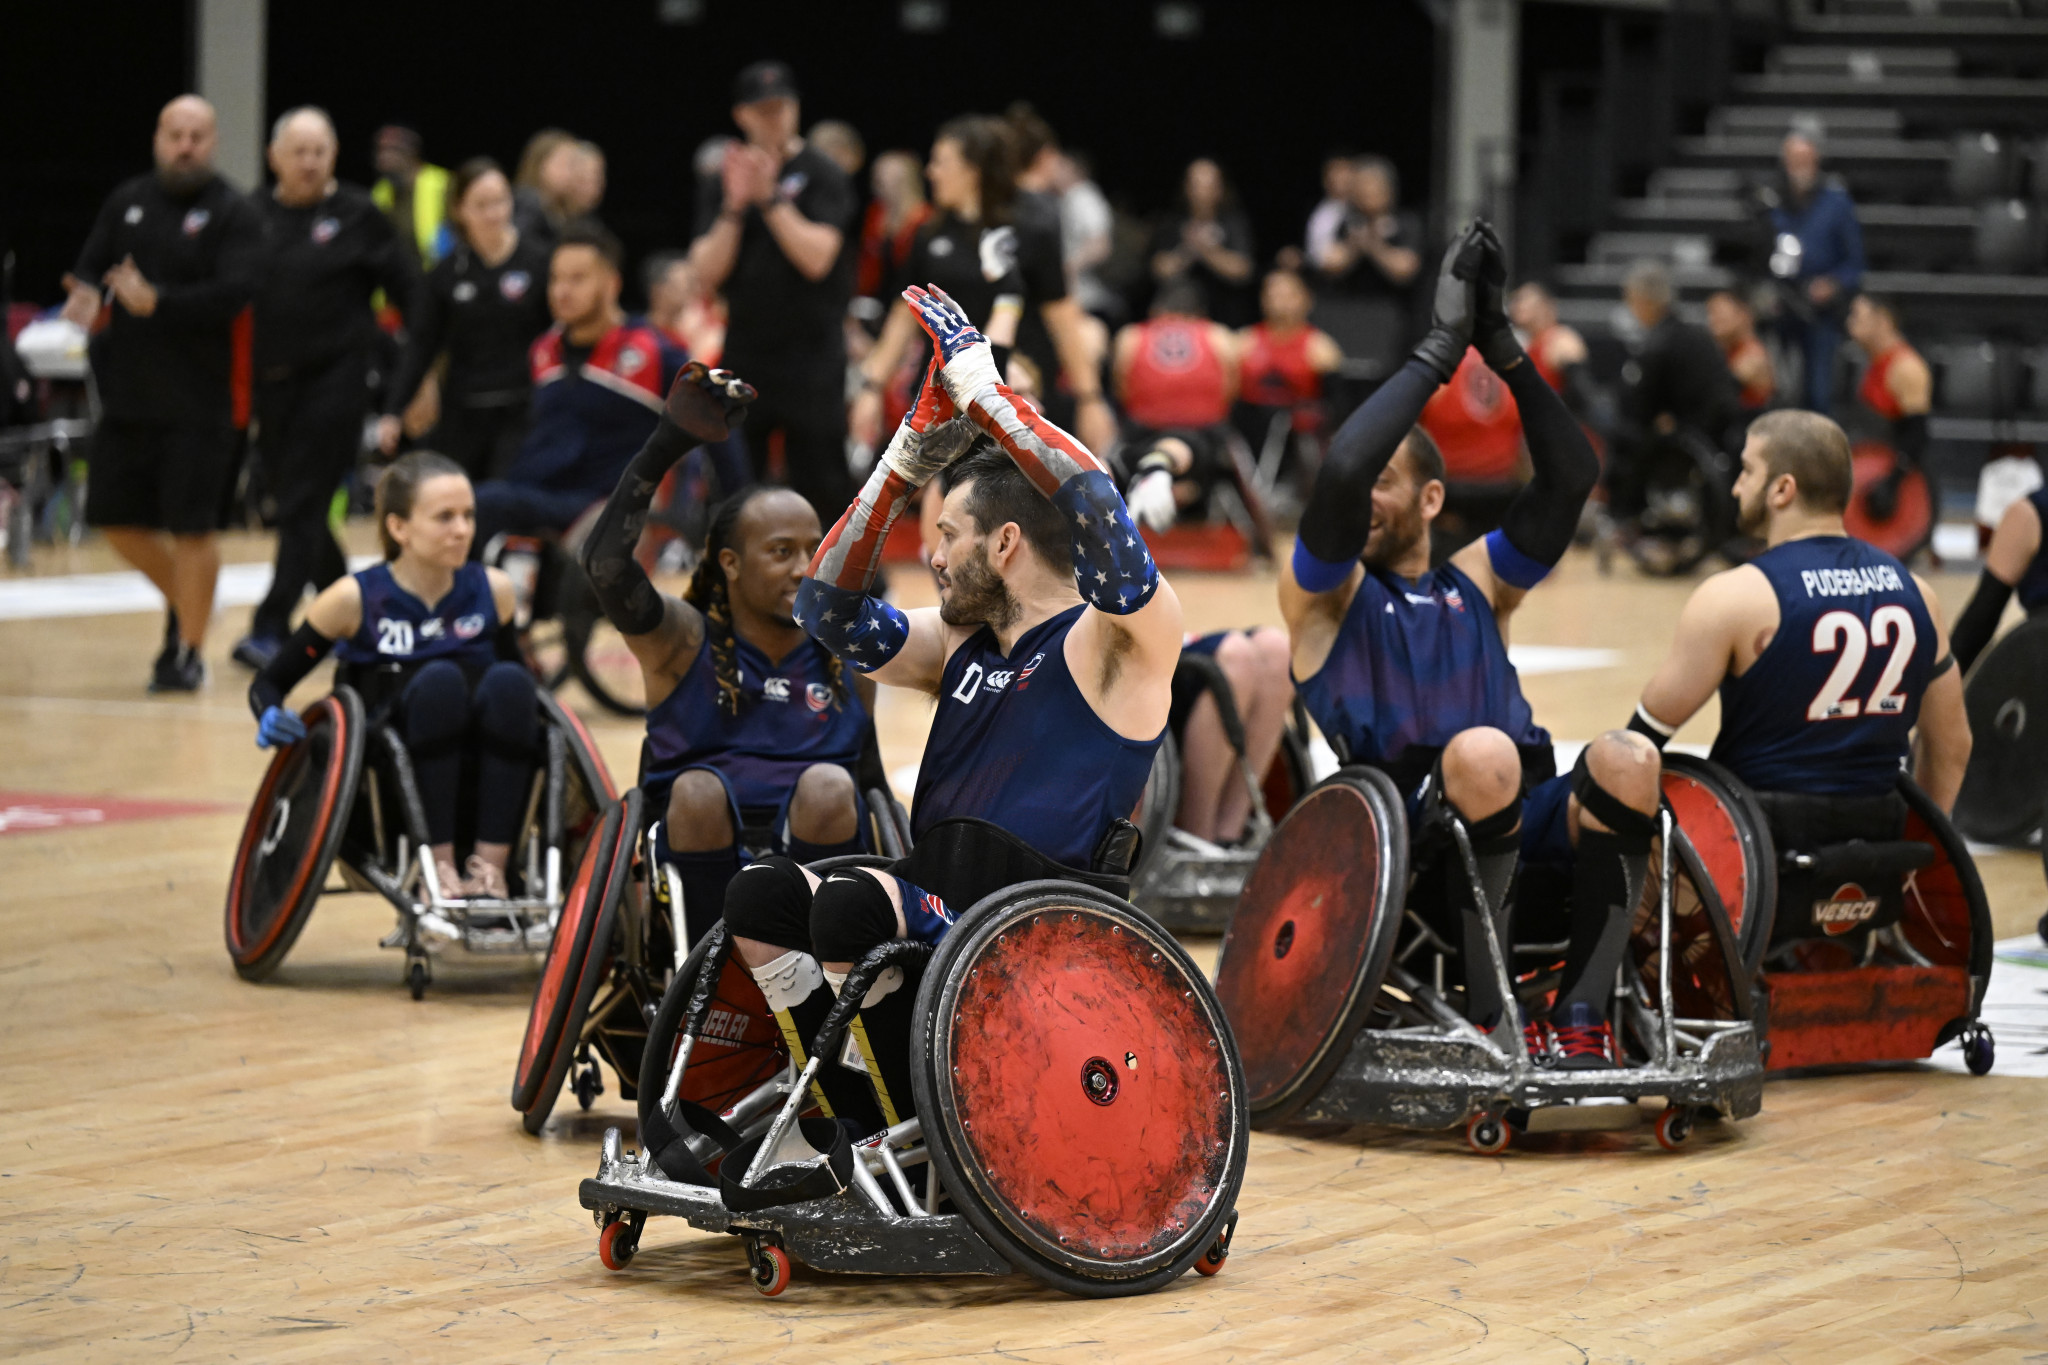 The United States battled from a losing position for the majority of the first half to beat Canada ©Lars Møller/Parasport Denmark